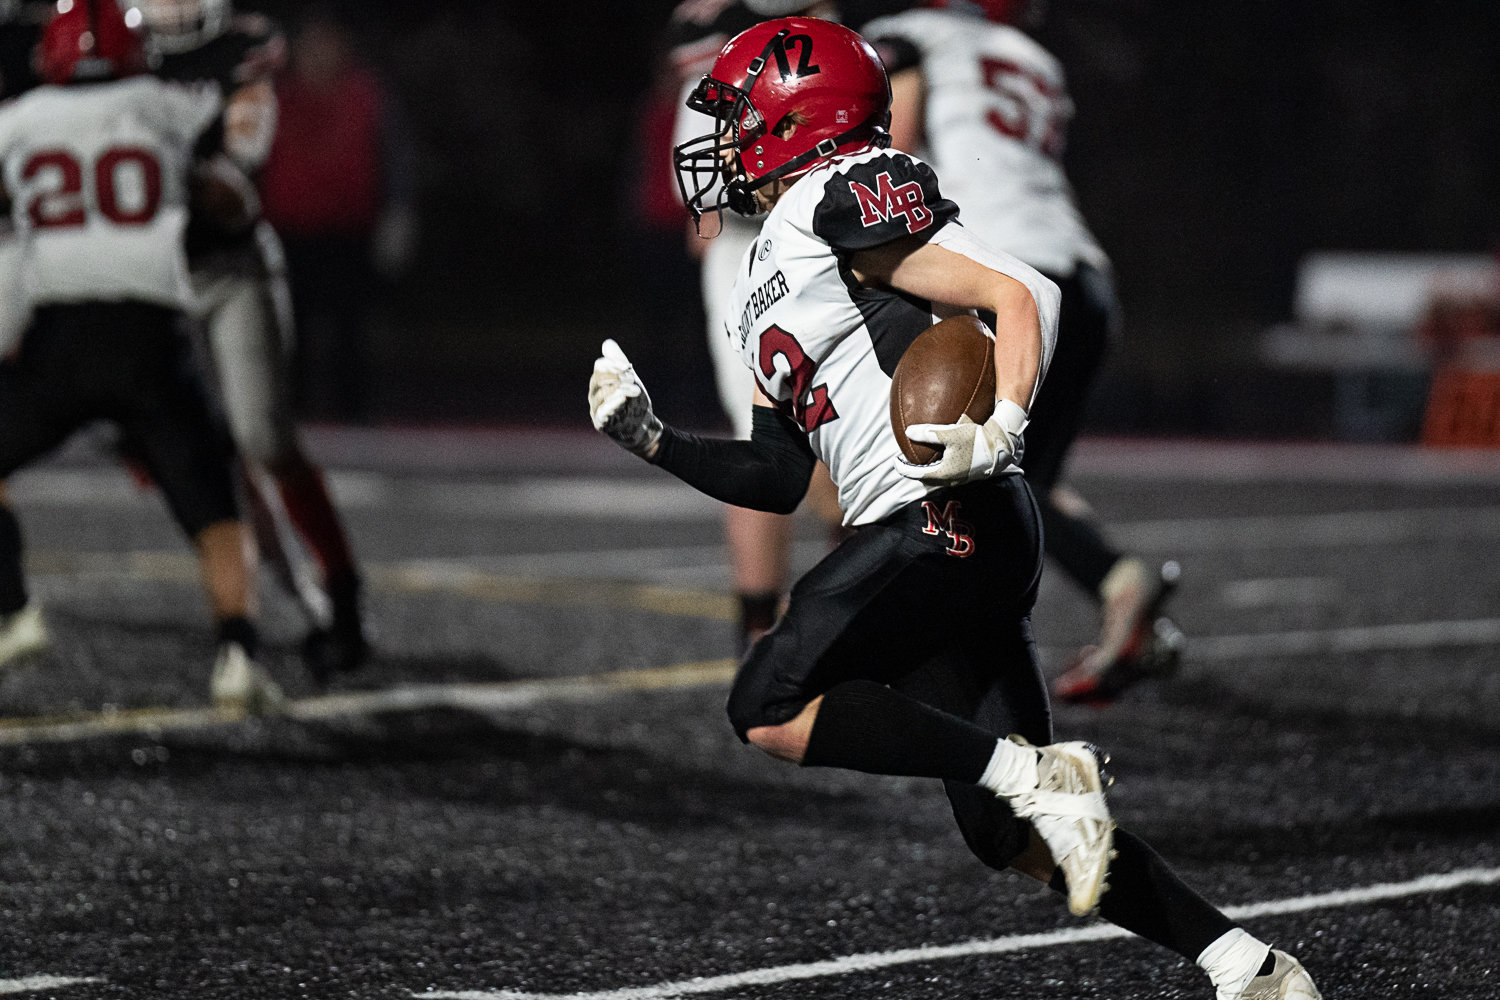 Mount Baker running back Landen Hanstead takes a handoff around the outside against Tenino Nov. 11 in the first round of the state playoffs.